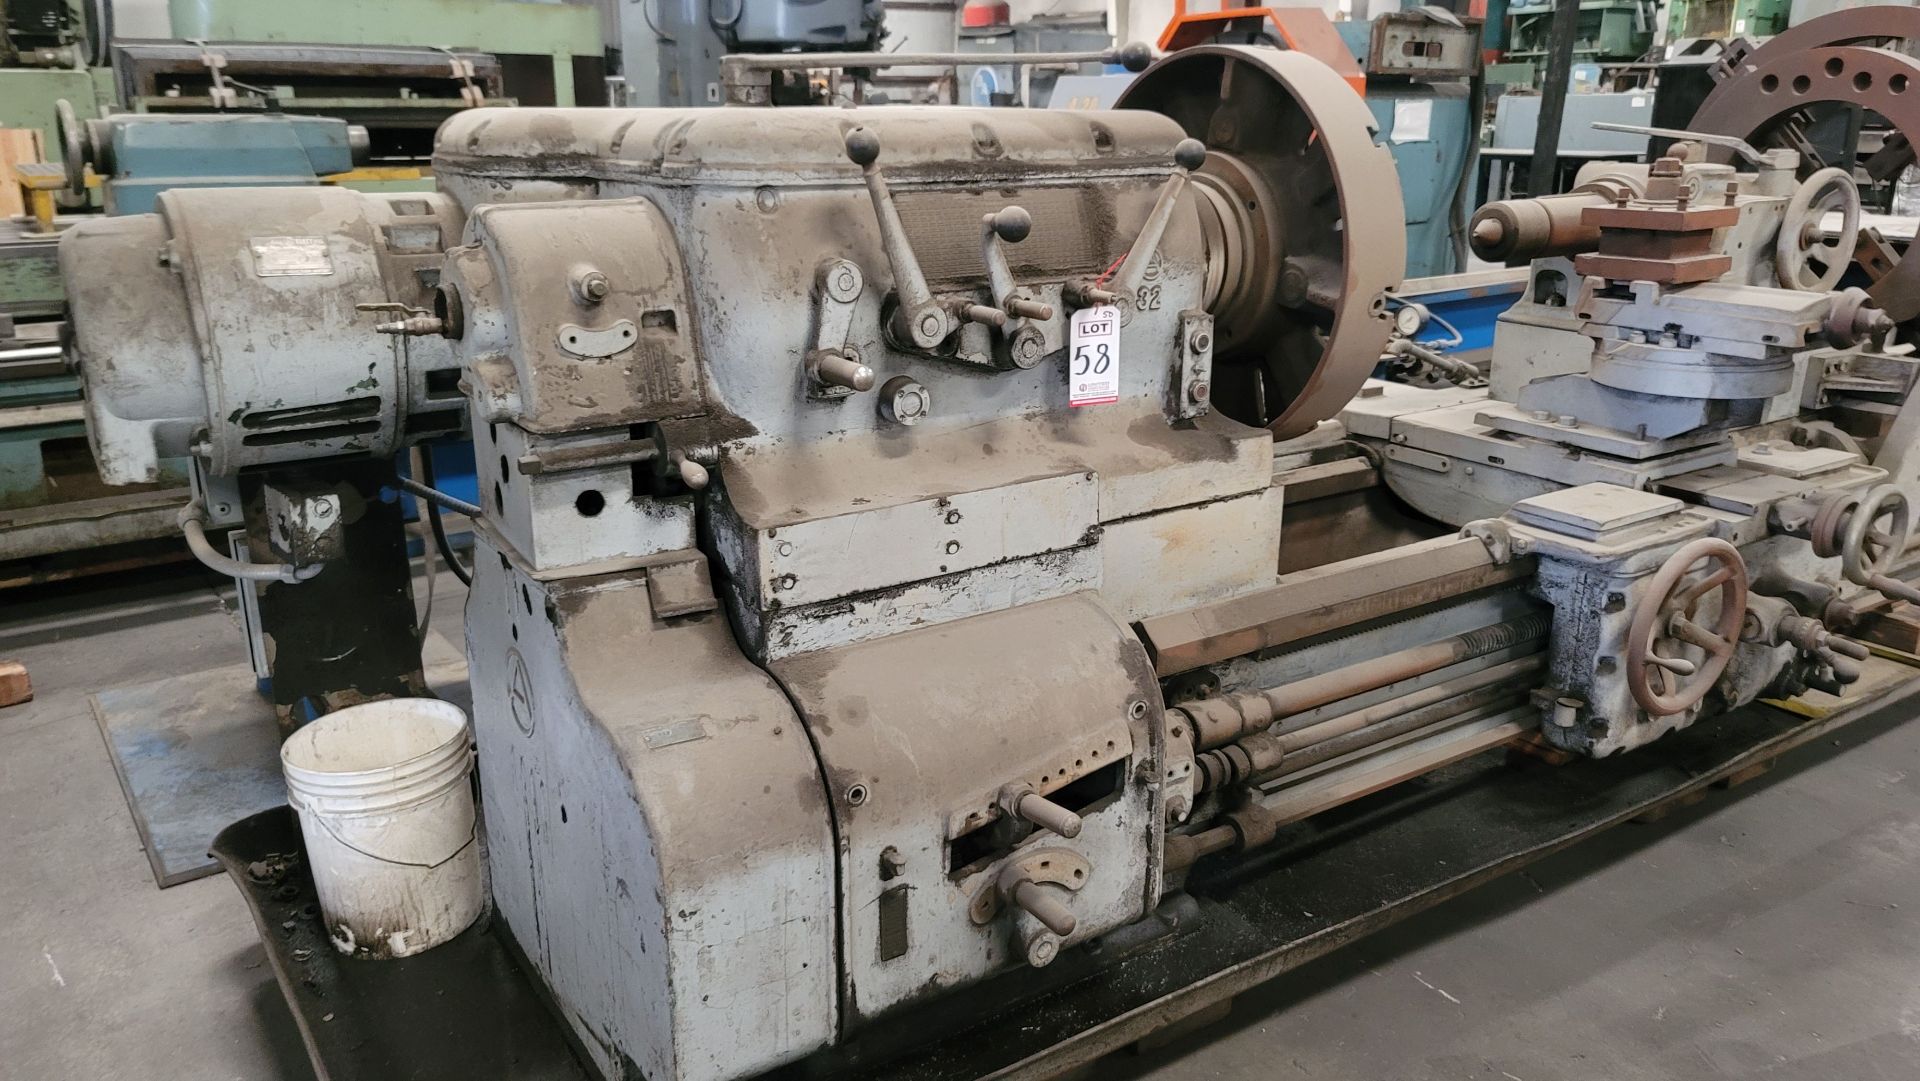 AXELSON A32 ENGINE LATHE, 32" X 168", 30" 4-JAW CHUCK, TAILSTOCK, (2) STEADY RESTS - Image 9 of 9